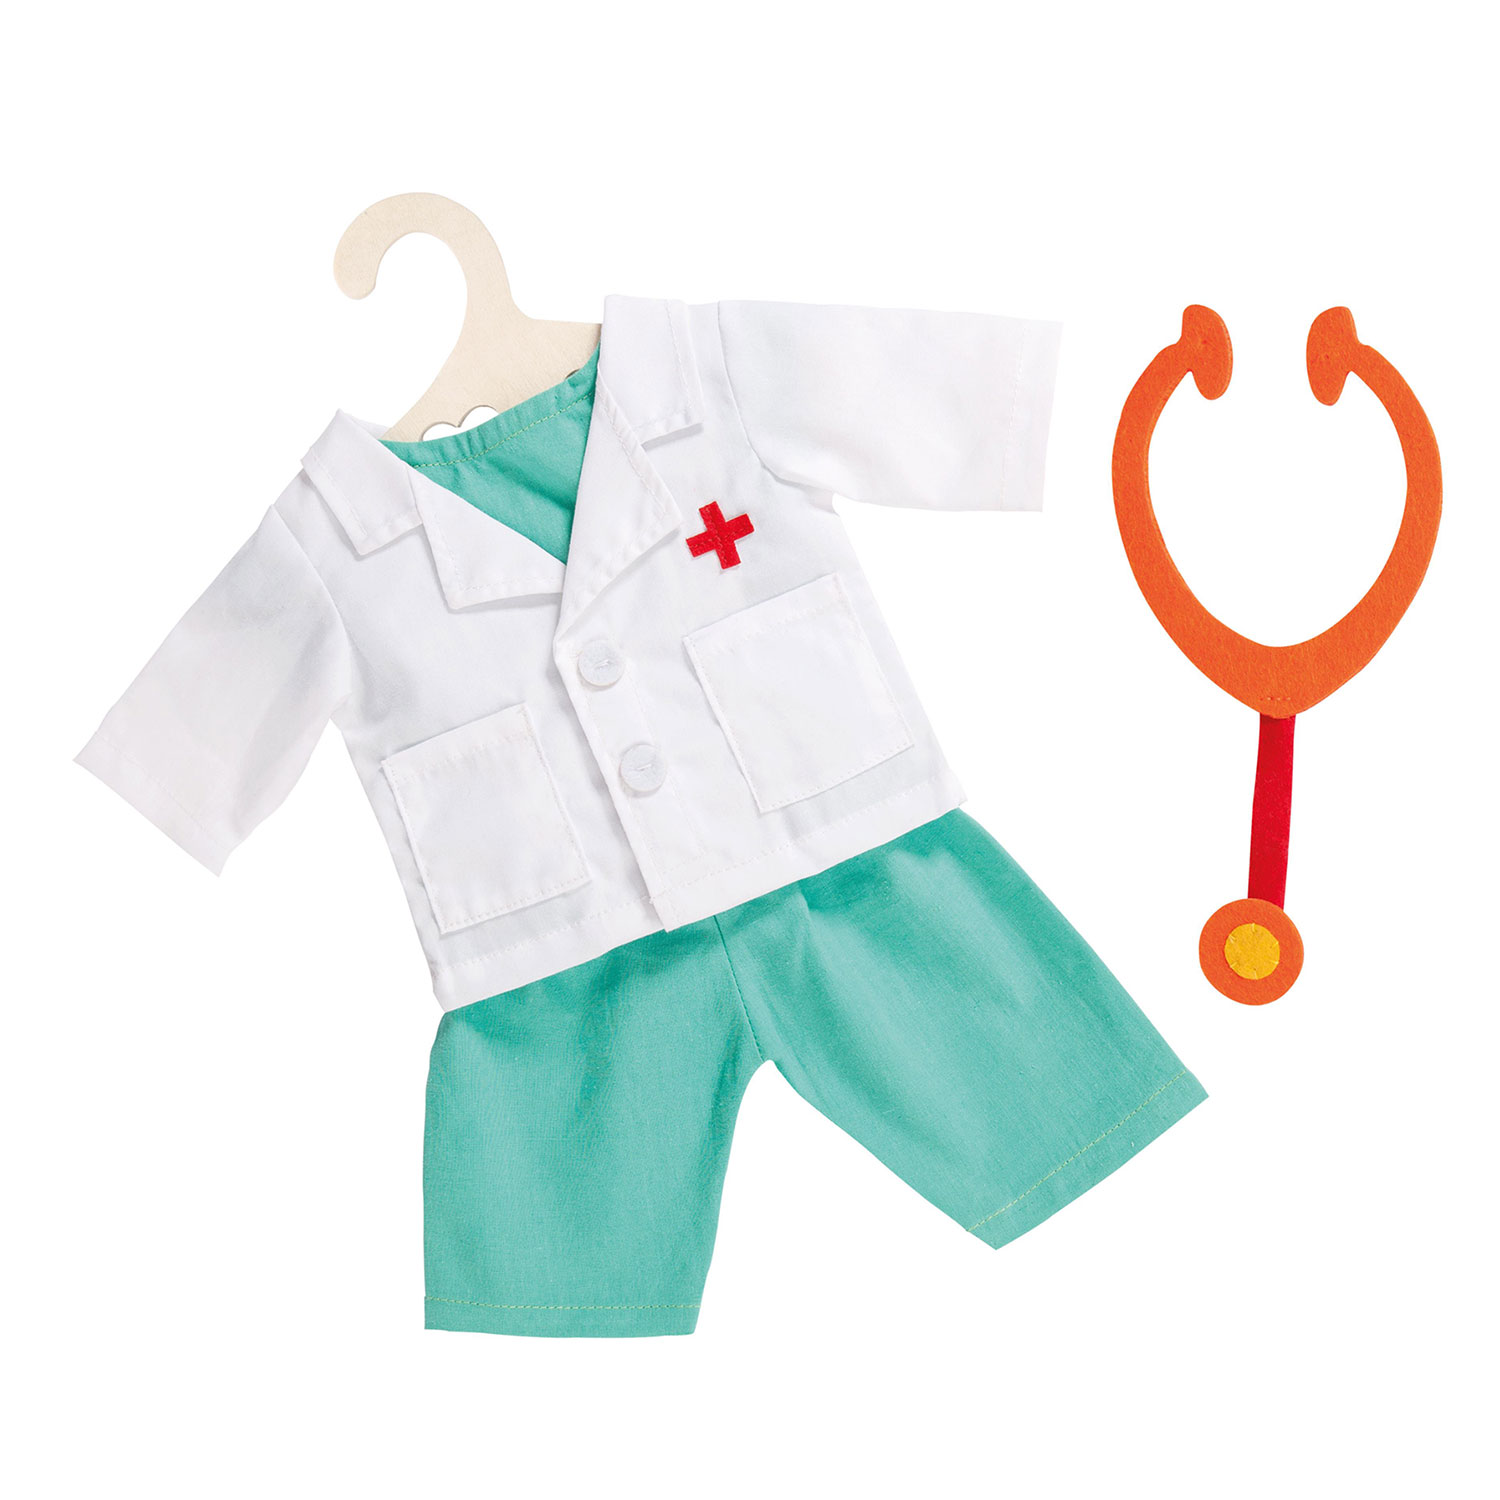 Arashigaoka Zonder hoofd stroom Doll doctor's outfit with stethoscope, 38-45 cm | Thimble Toys